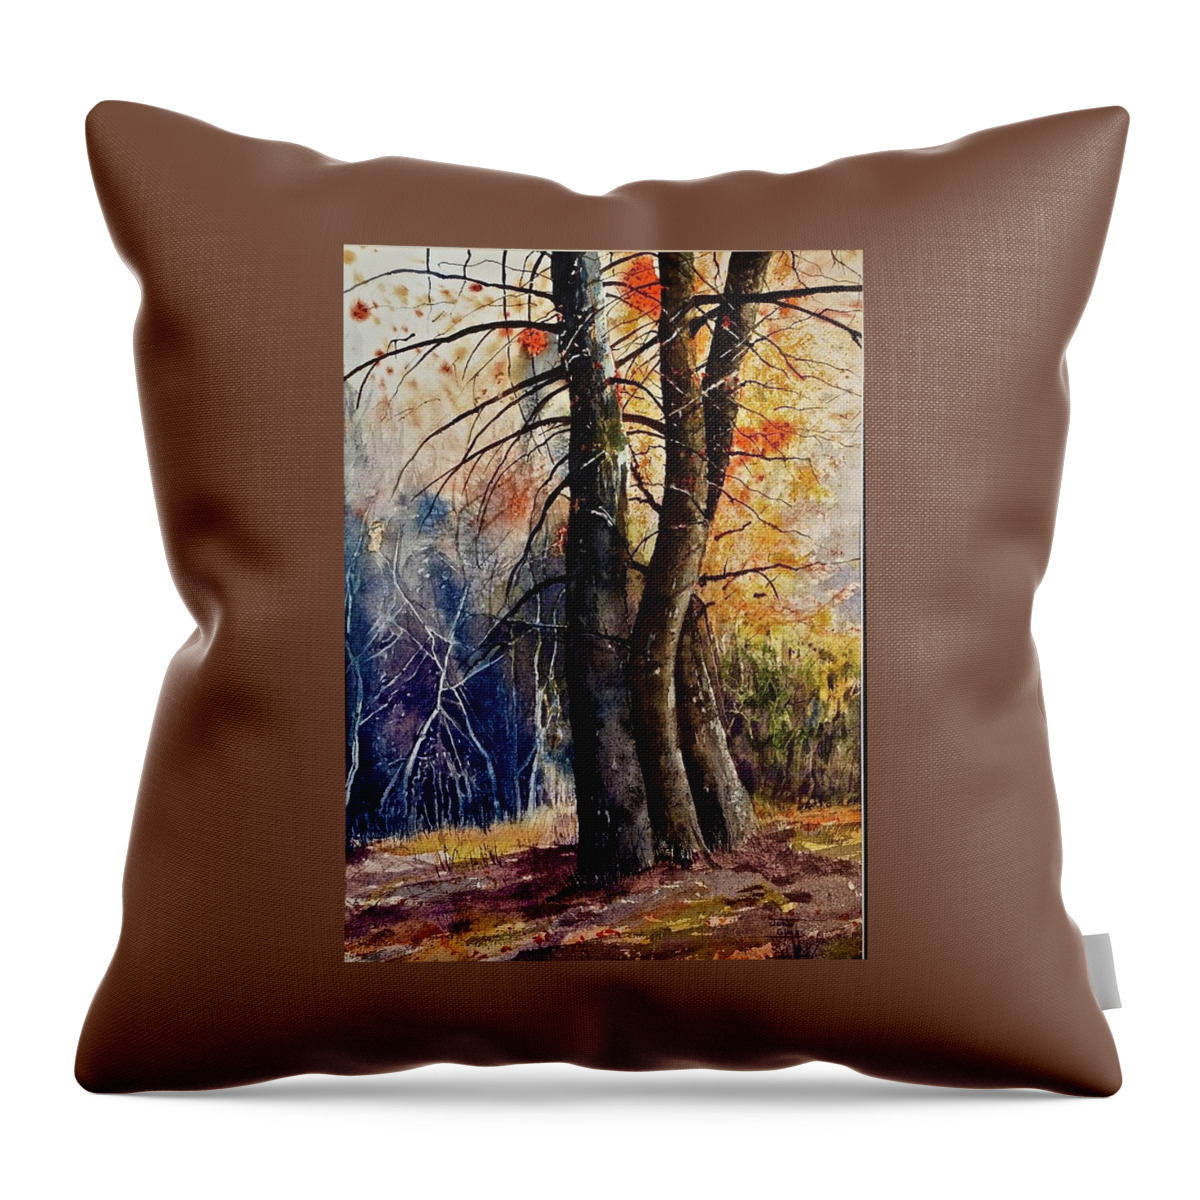 Cave Creek Canyon Throw Pillow featuring the painting Cave Creek Canyon by John Glass